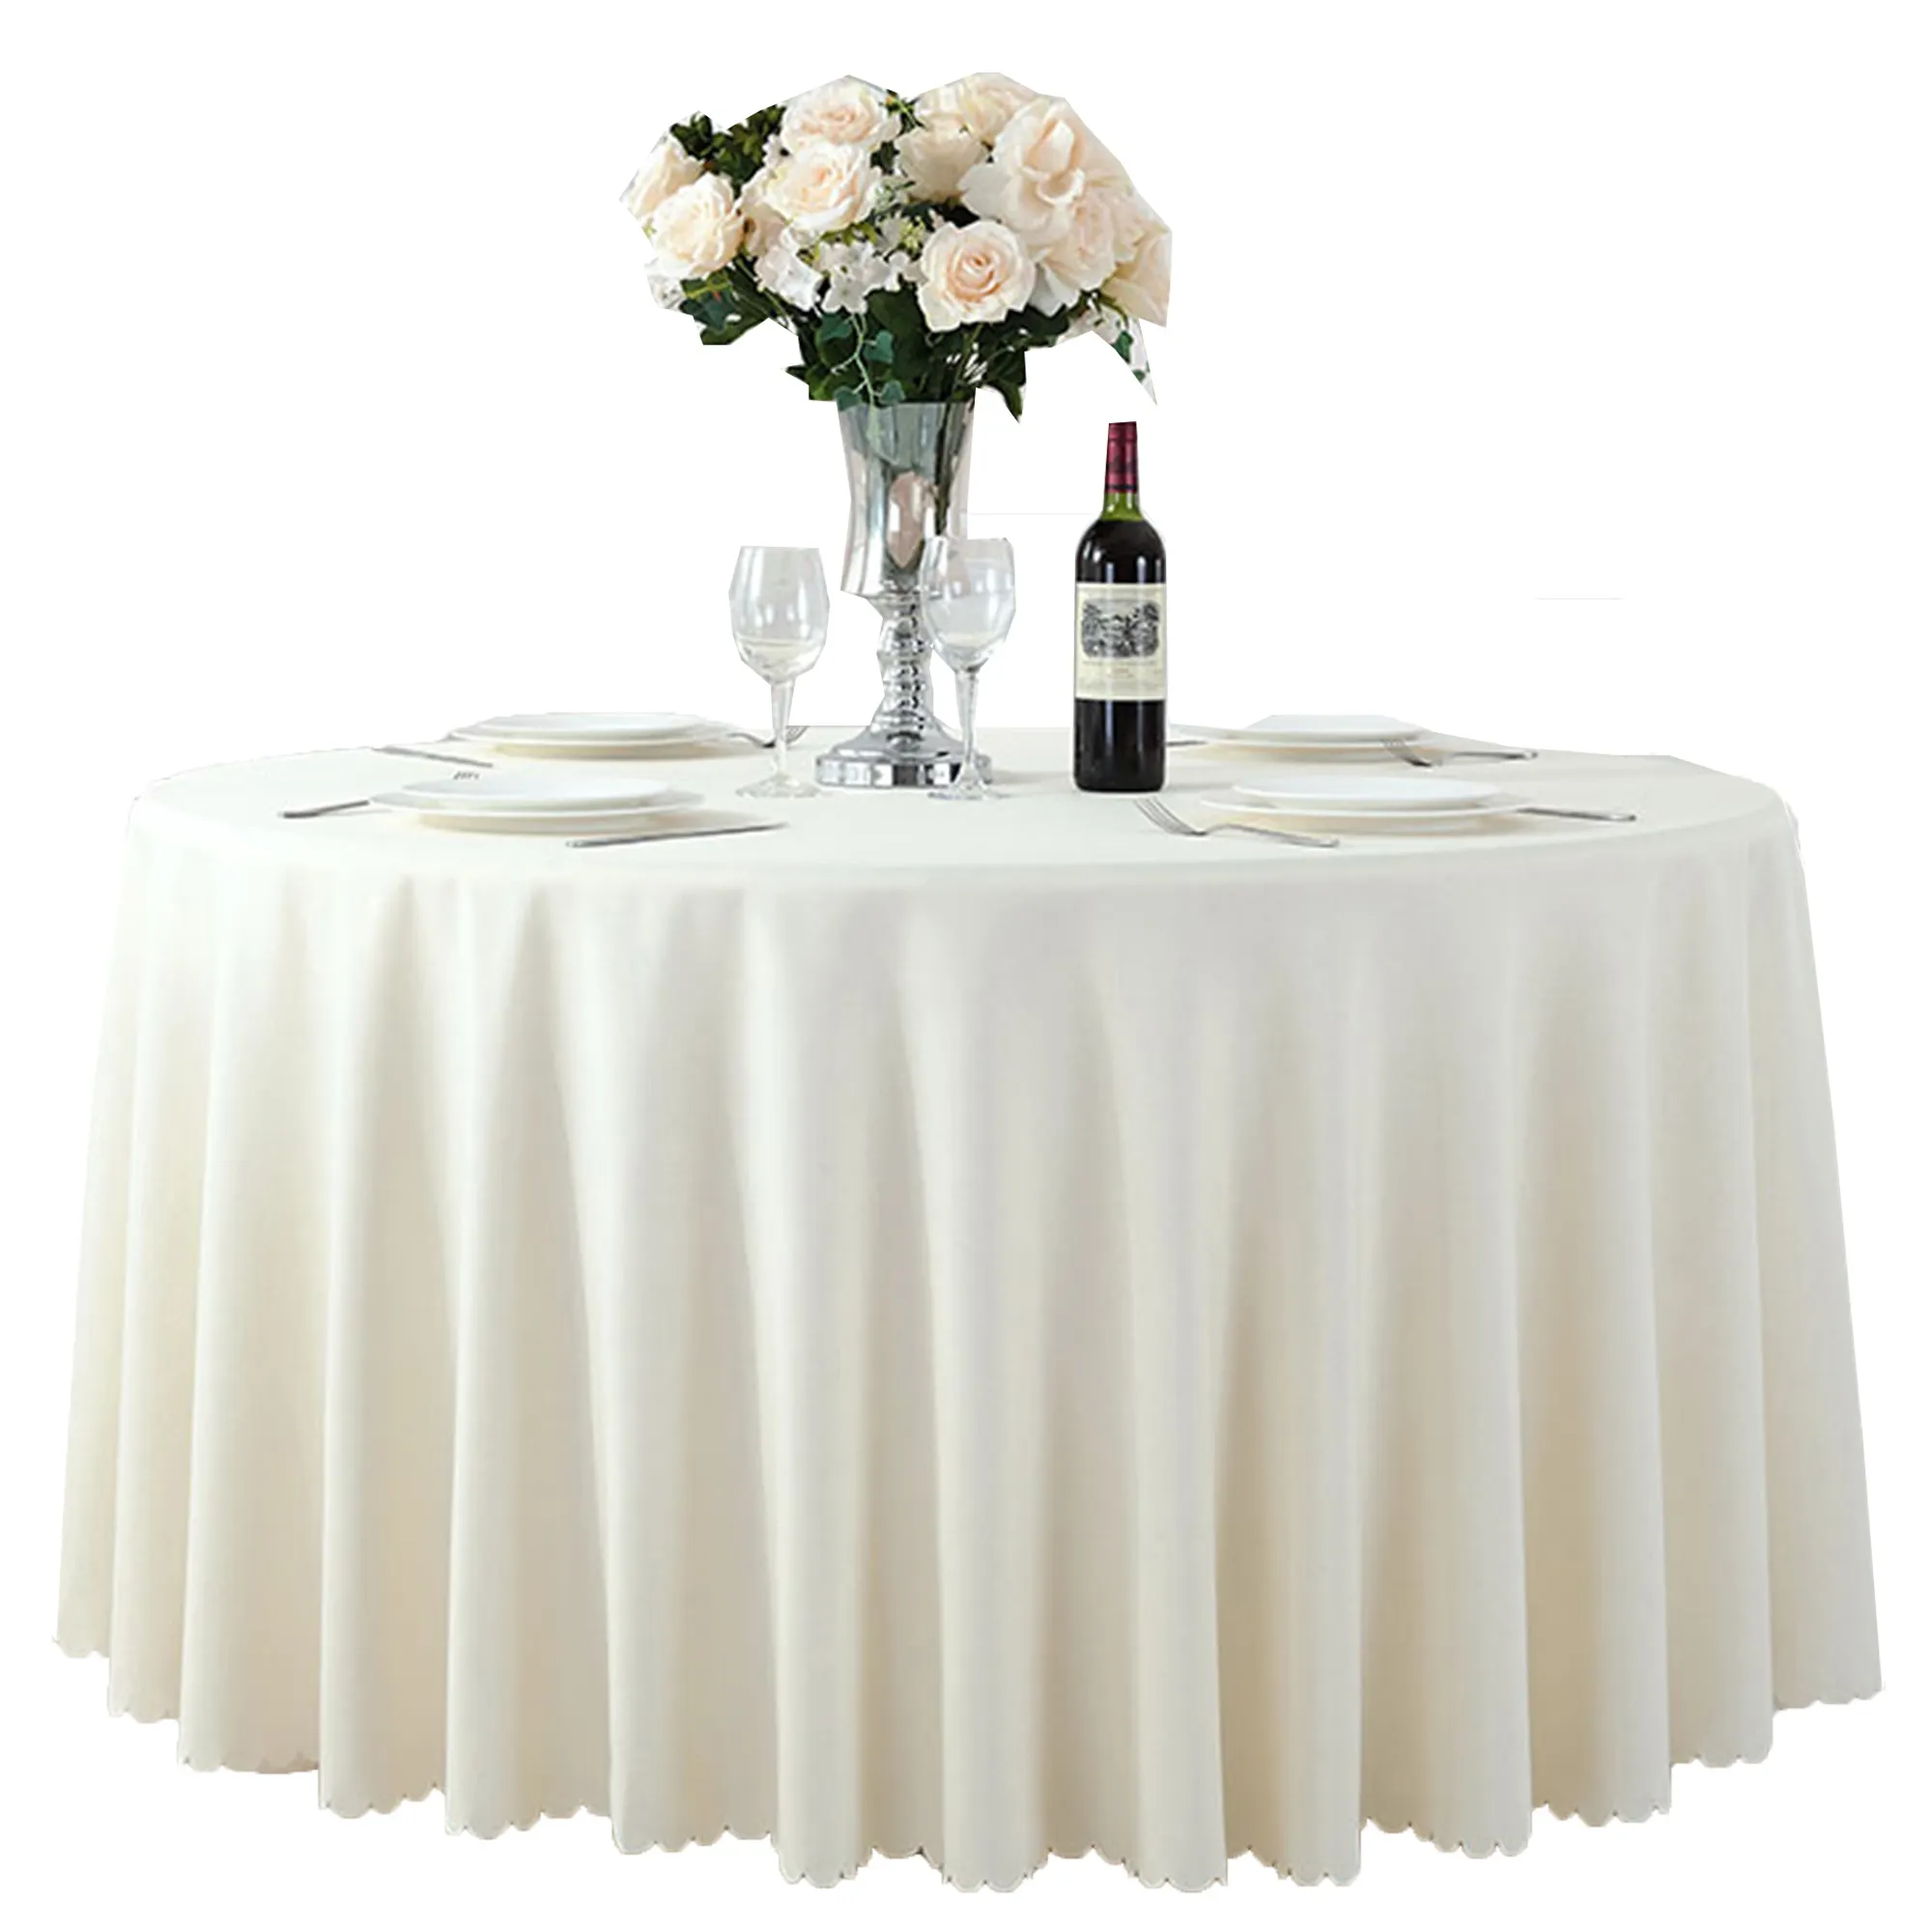 Woven fabric 120 inch ivory round table clothscream white table cloths for wedding